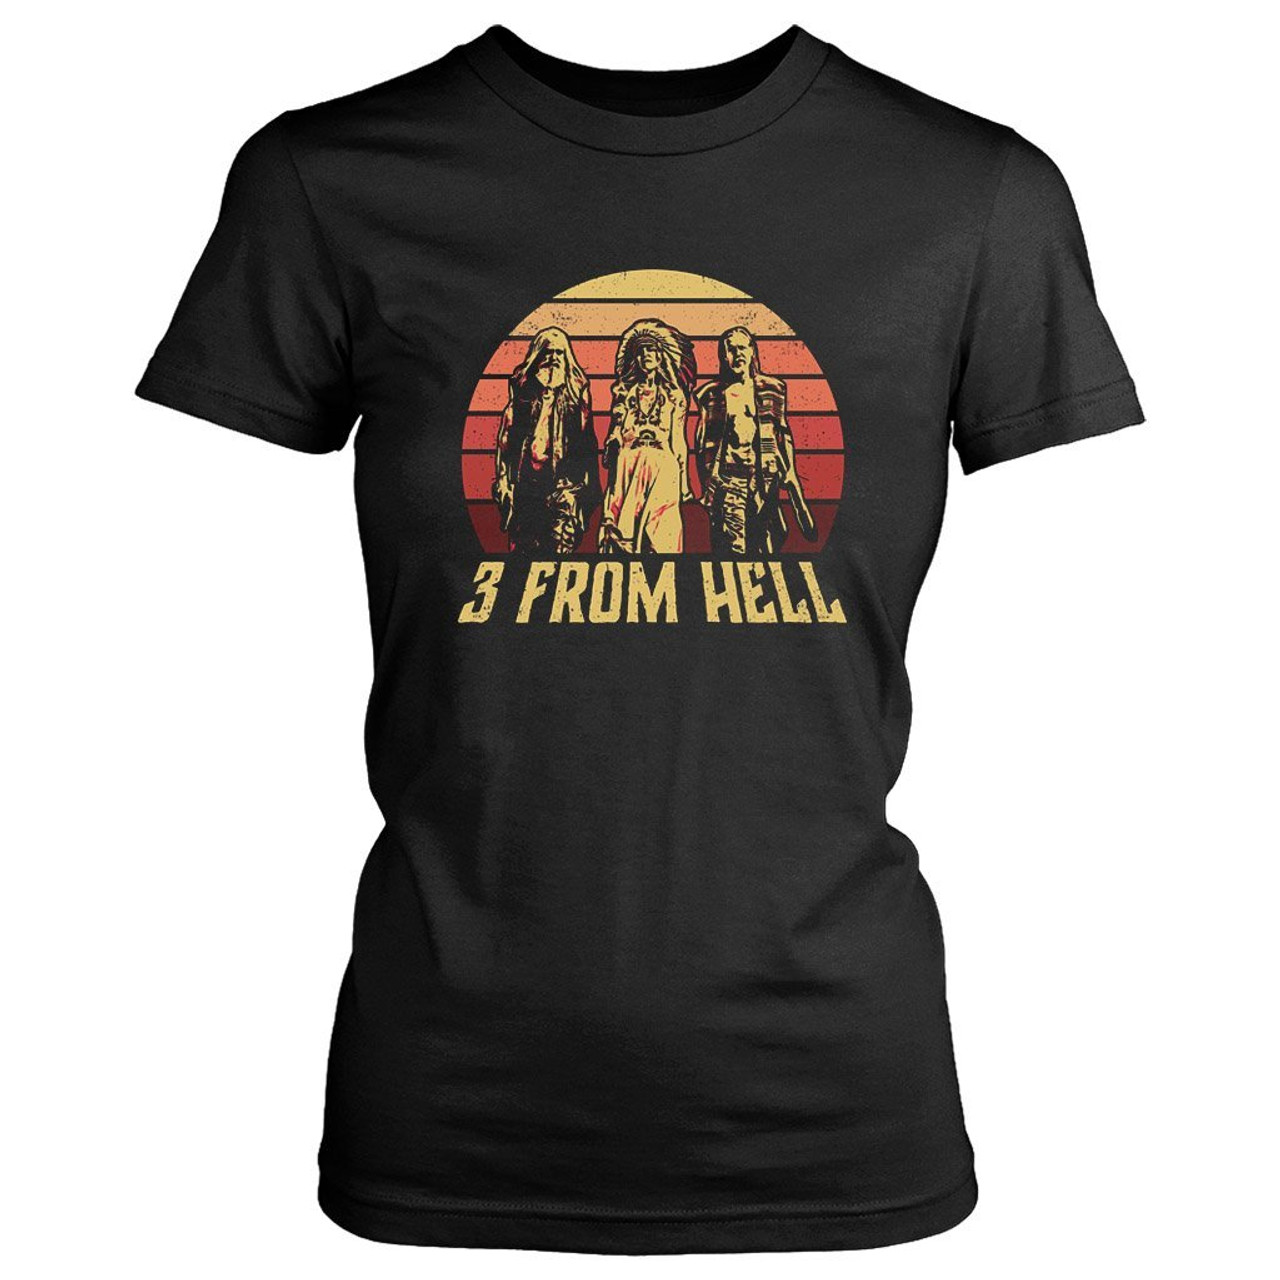 3 From Hell Friends Retro Vintage Women's T-Shirt Tee